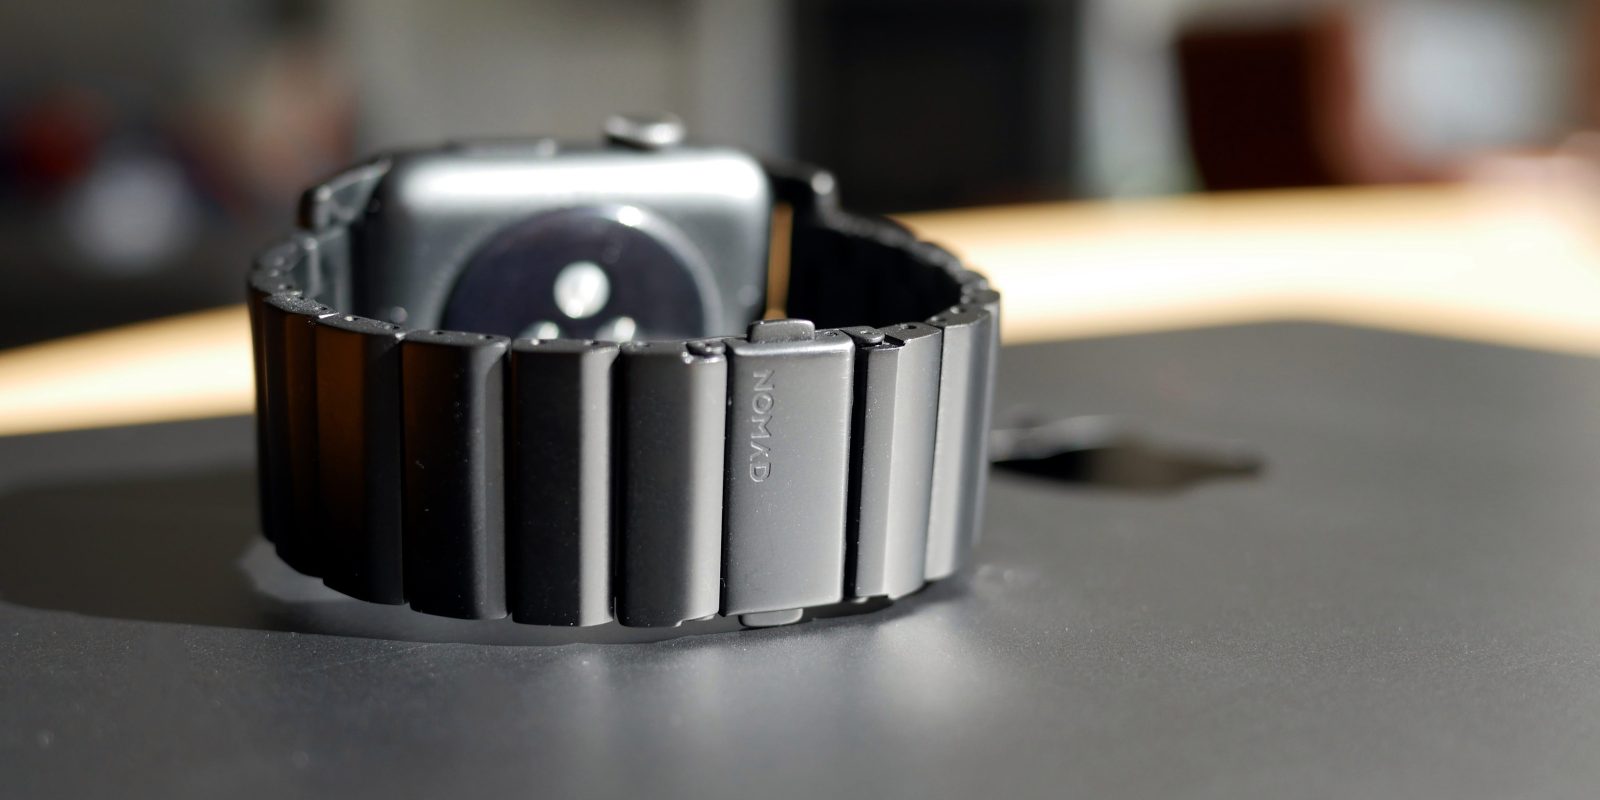 Nomad Titanium Band Review The most comfortable link Apple Watch band